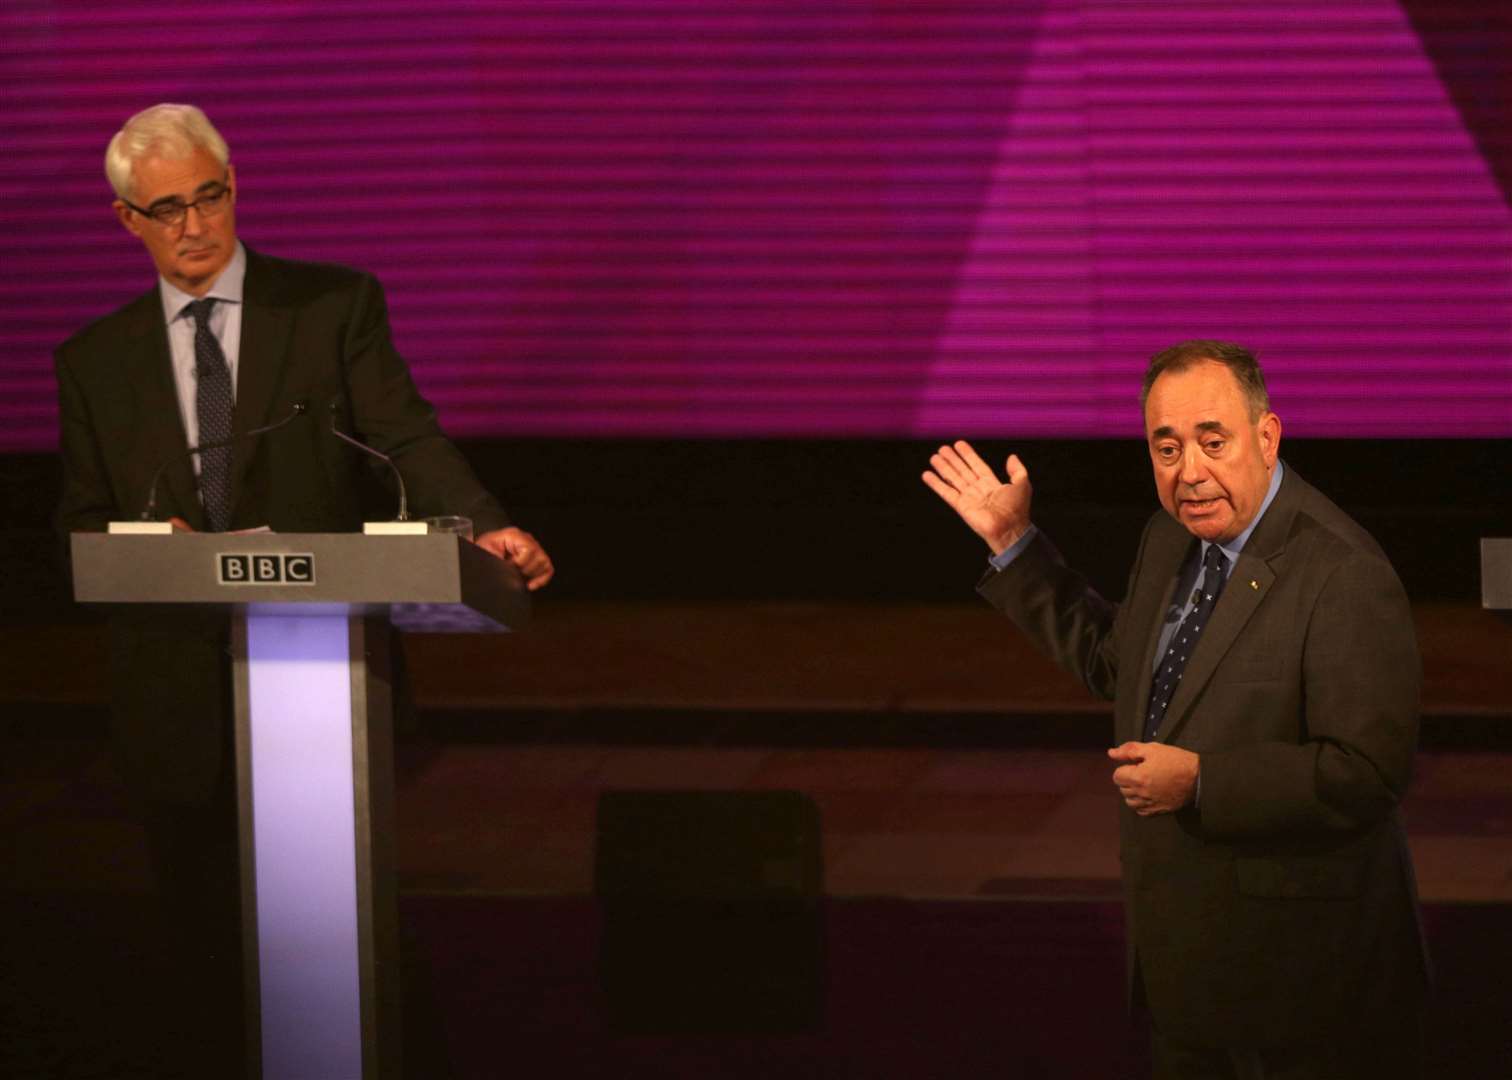 Mr Darling debated then first minister Alex Salmond on Scottish independence ahead of the 2014 referendum (PA)